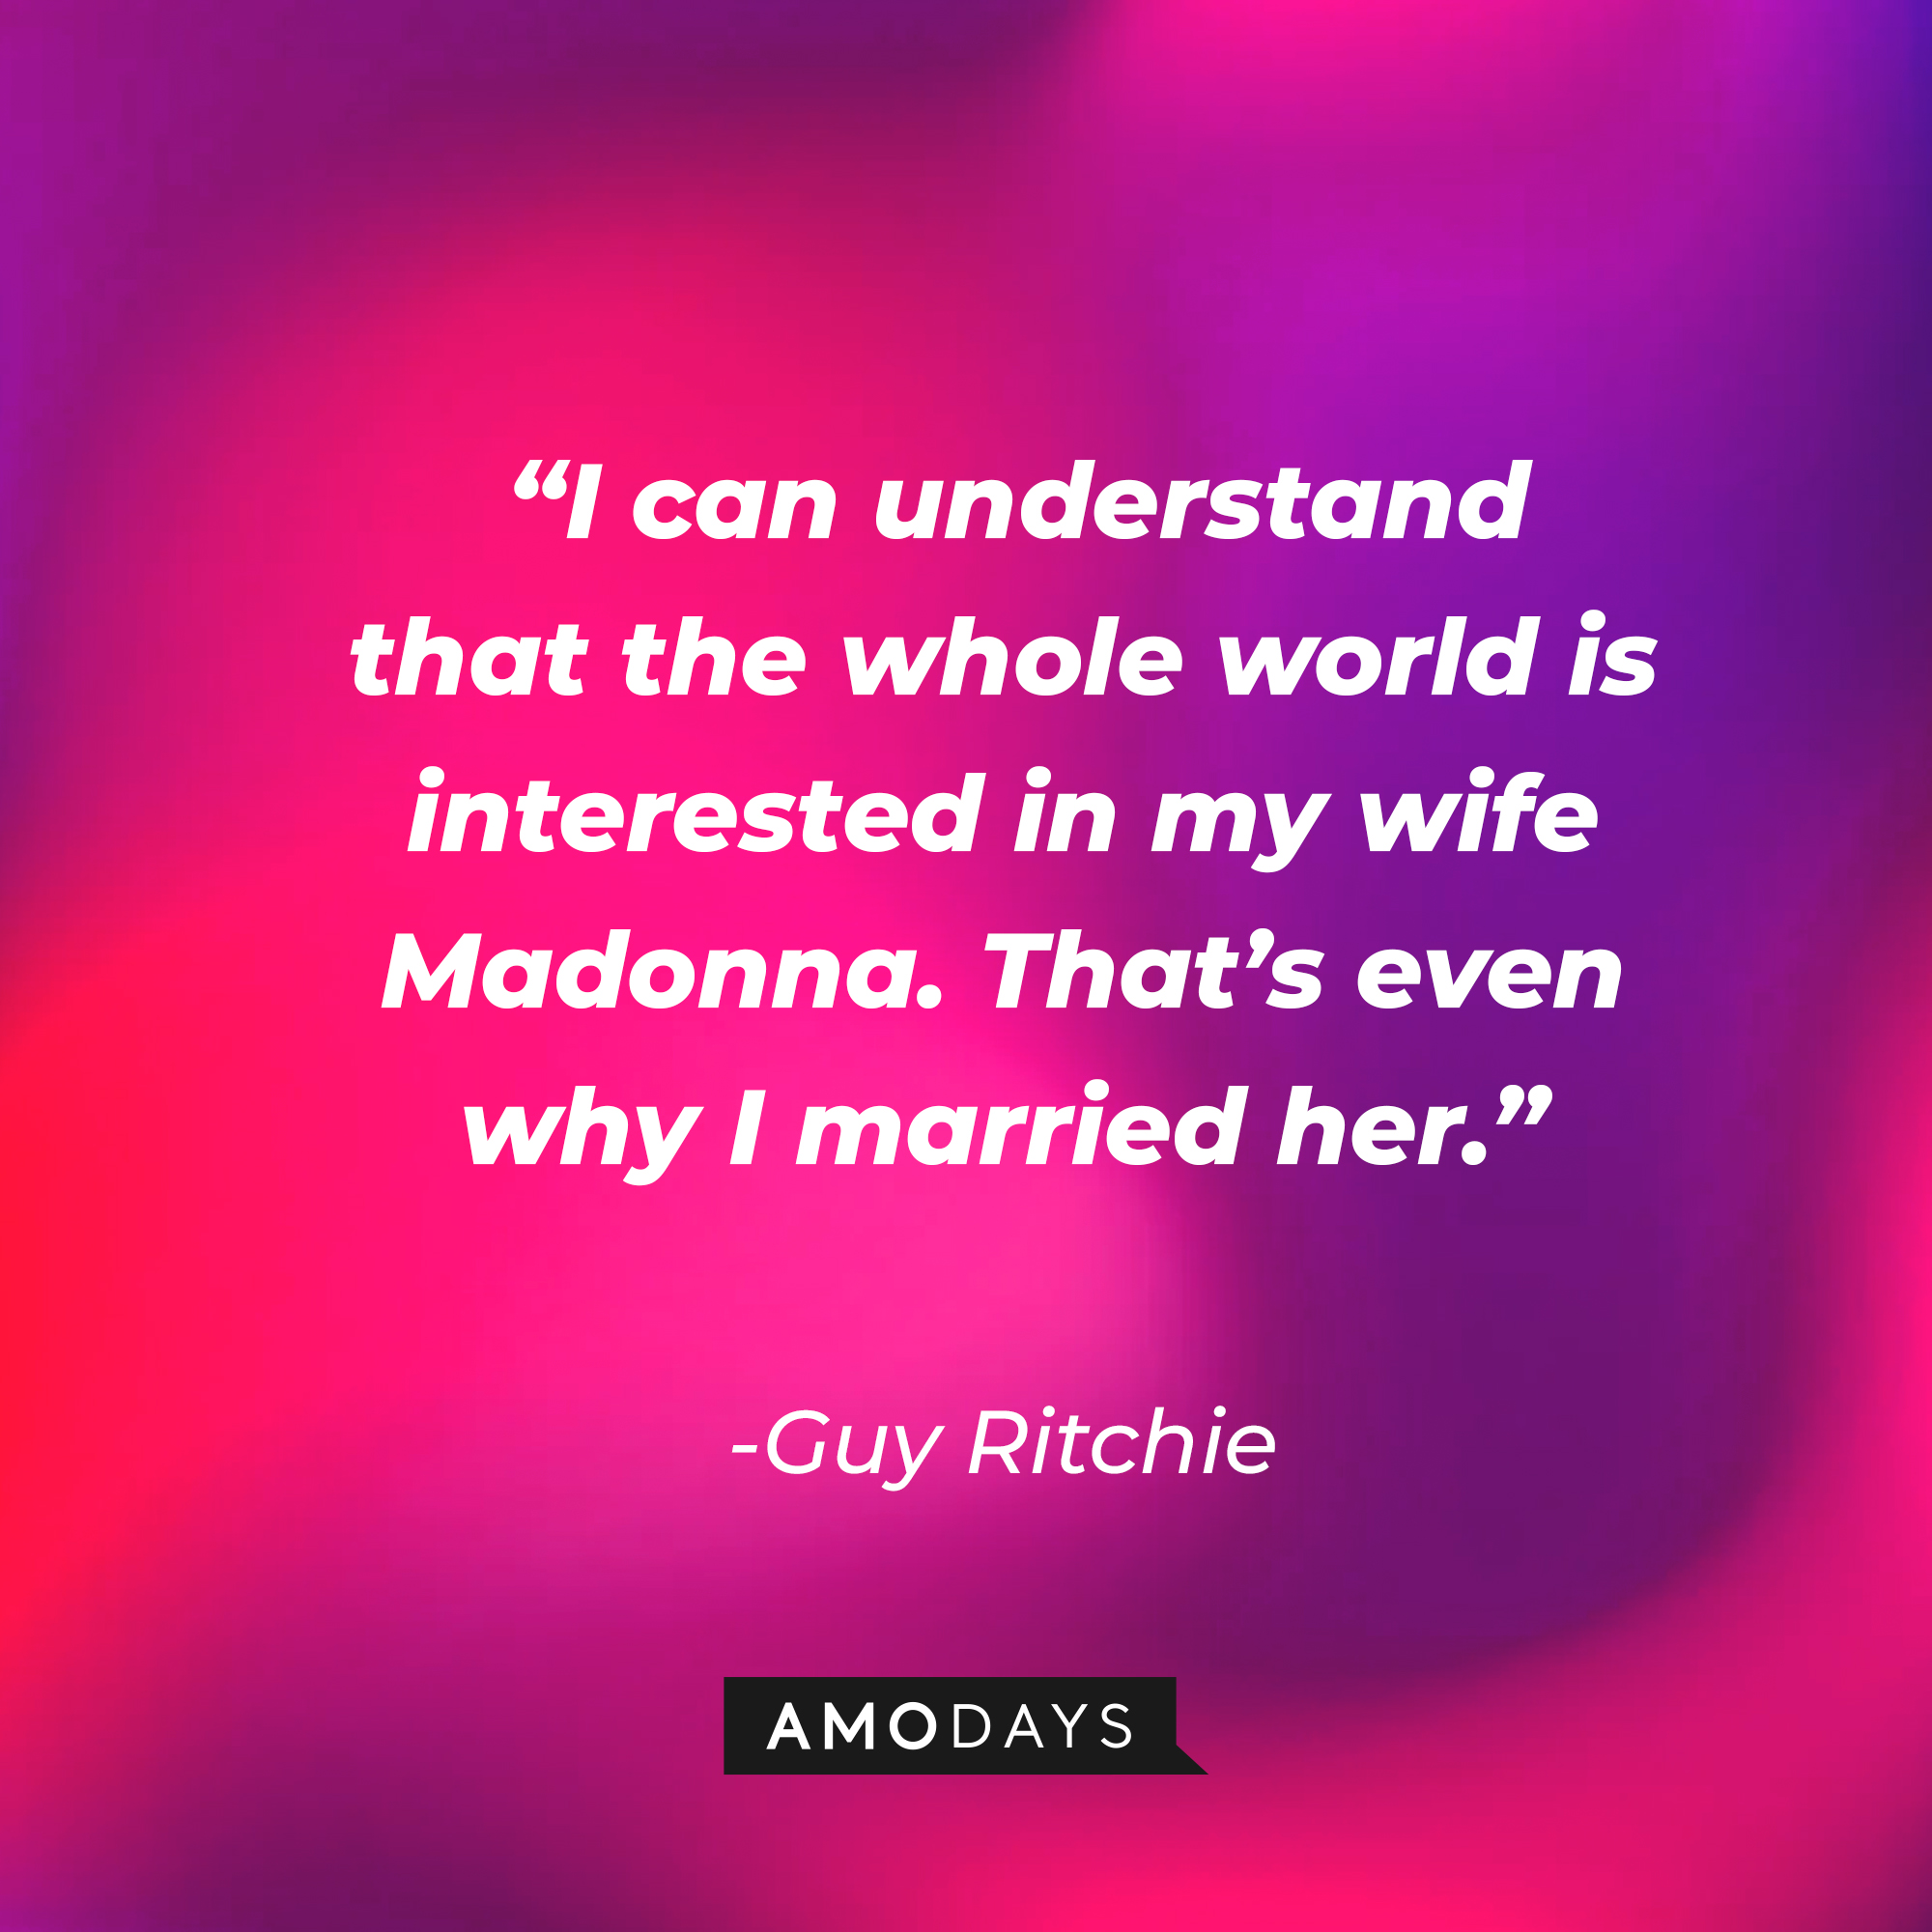 Guy Ritchie's quote,  “I can understand that the whole world is interested in my wife Madonna. That’s even why I married her.” | Source: AmoDays